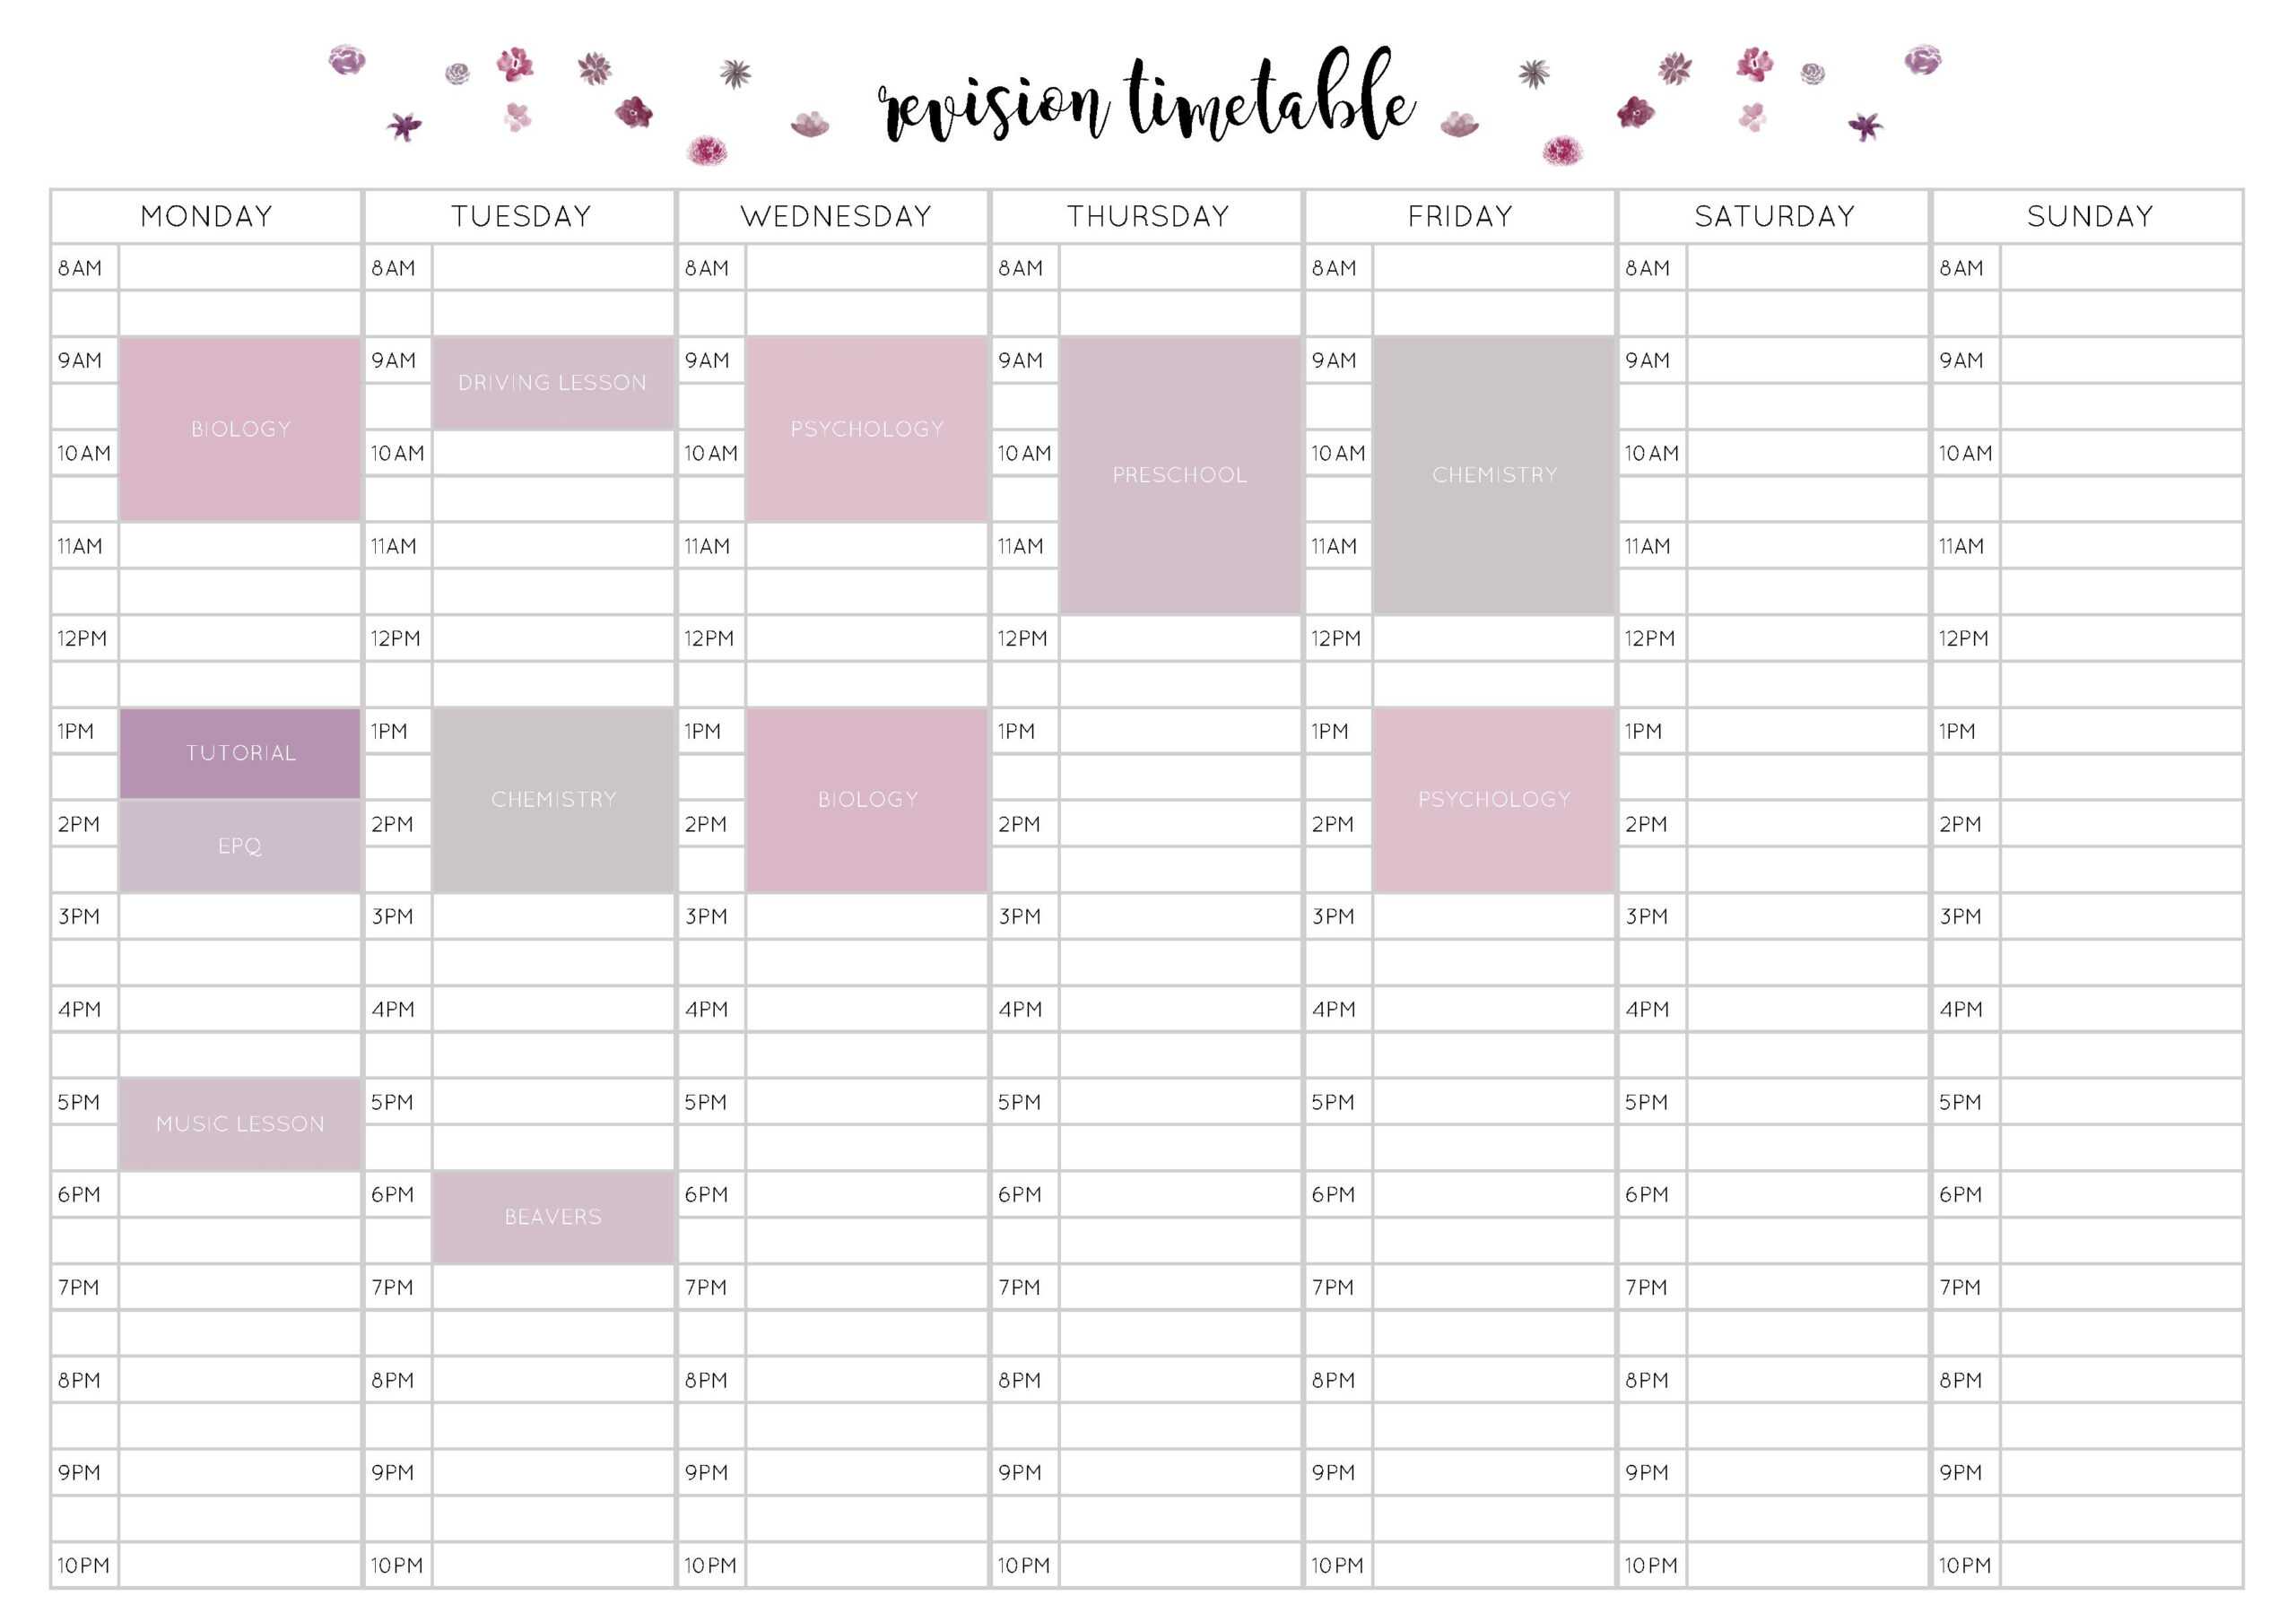 Free Revision Timetable Printable – Emily Studies Intended For Blank Revision Timetable Template